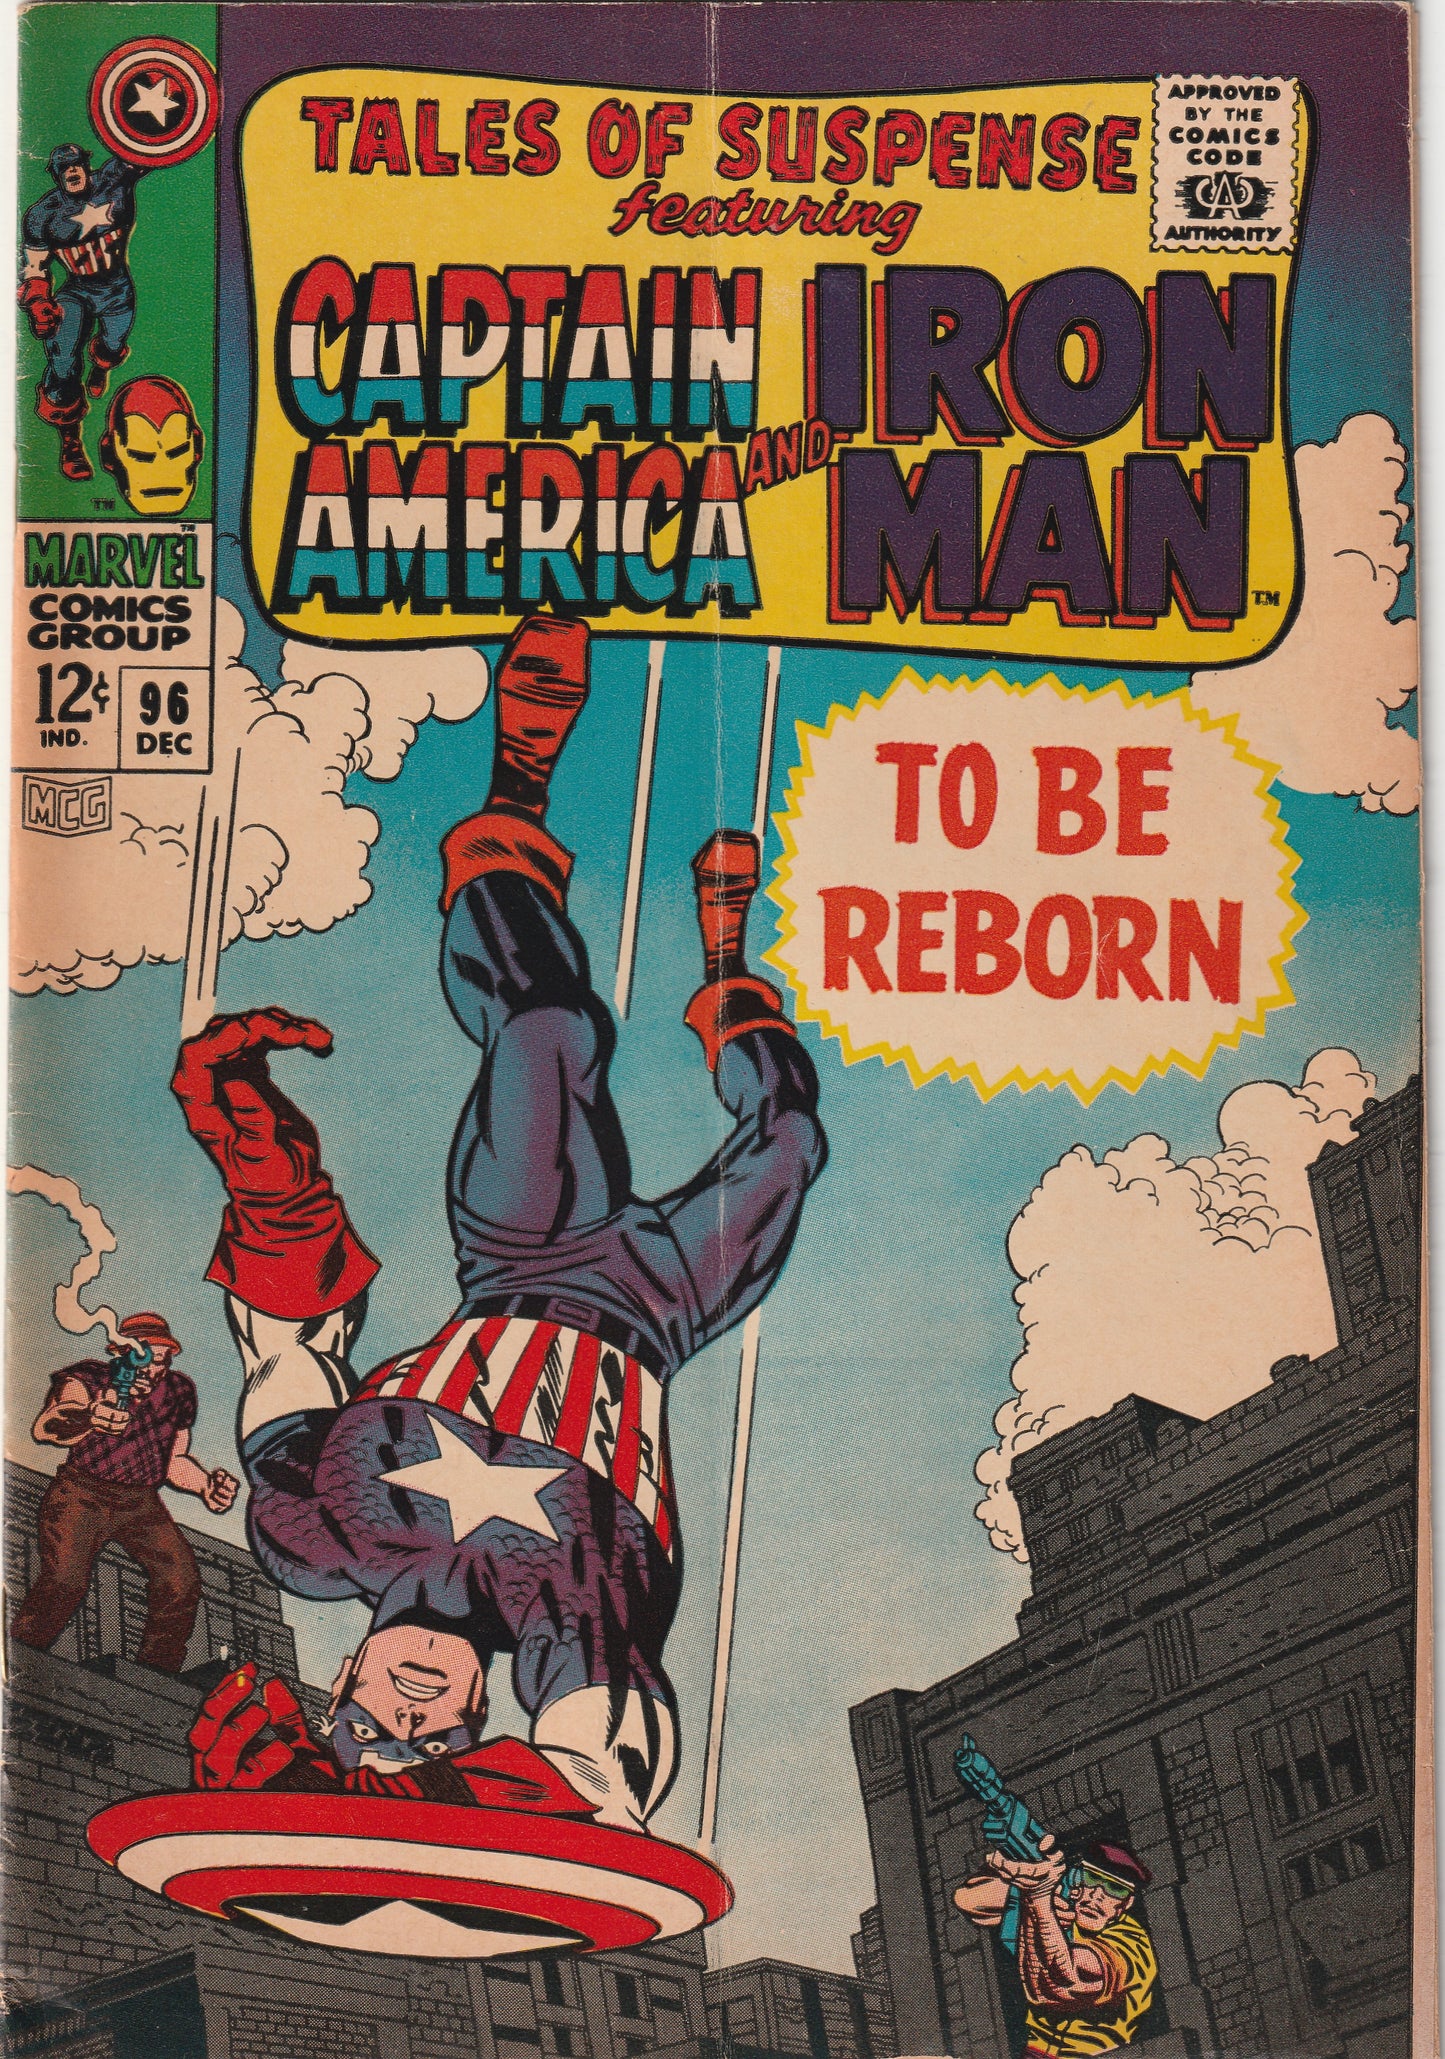 Tales of Suspense #96 (1967) - Featuring Captain America and Iron Man